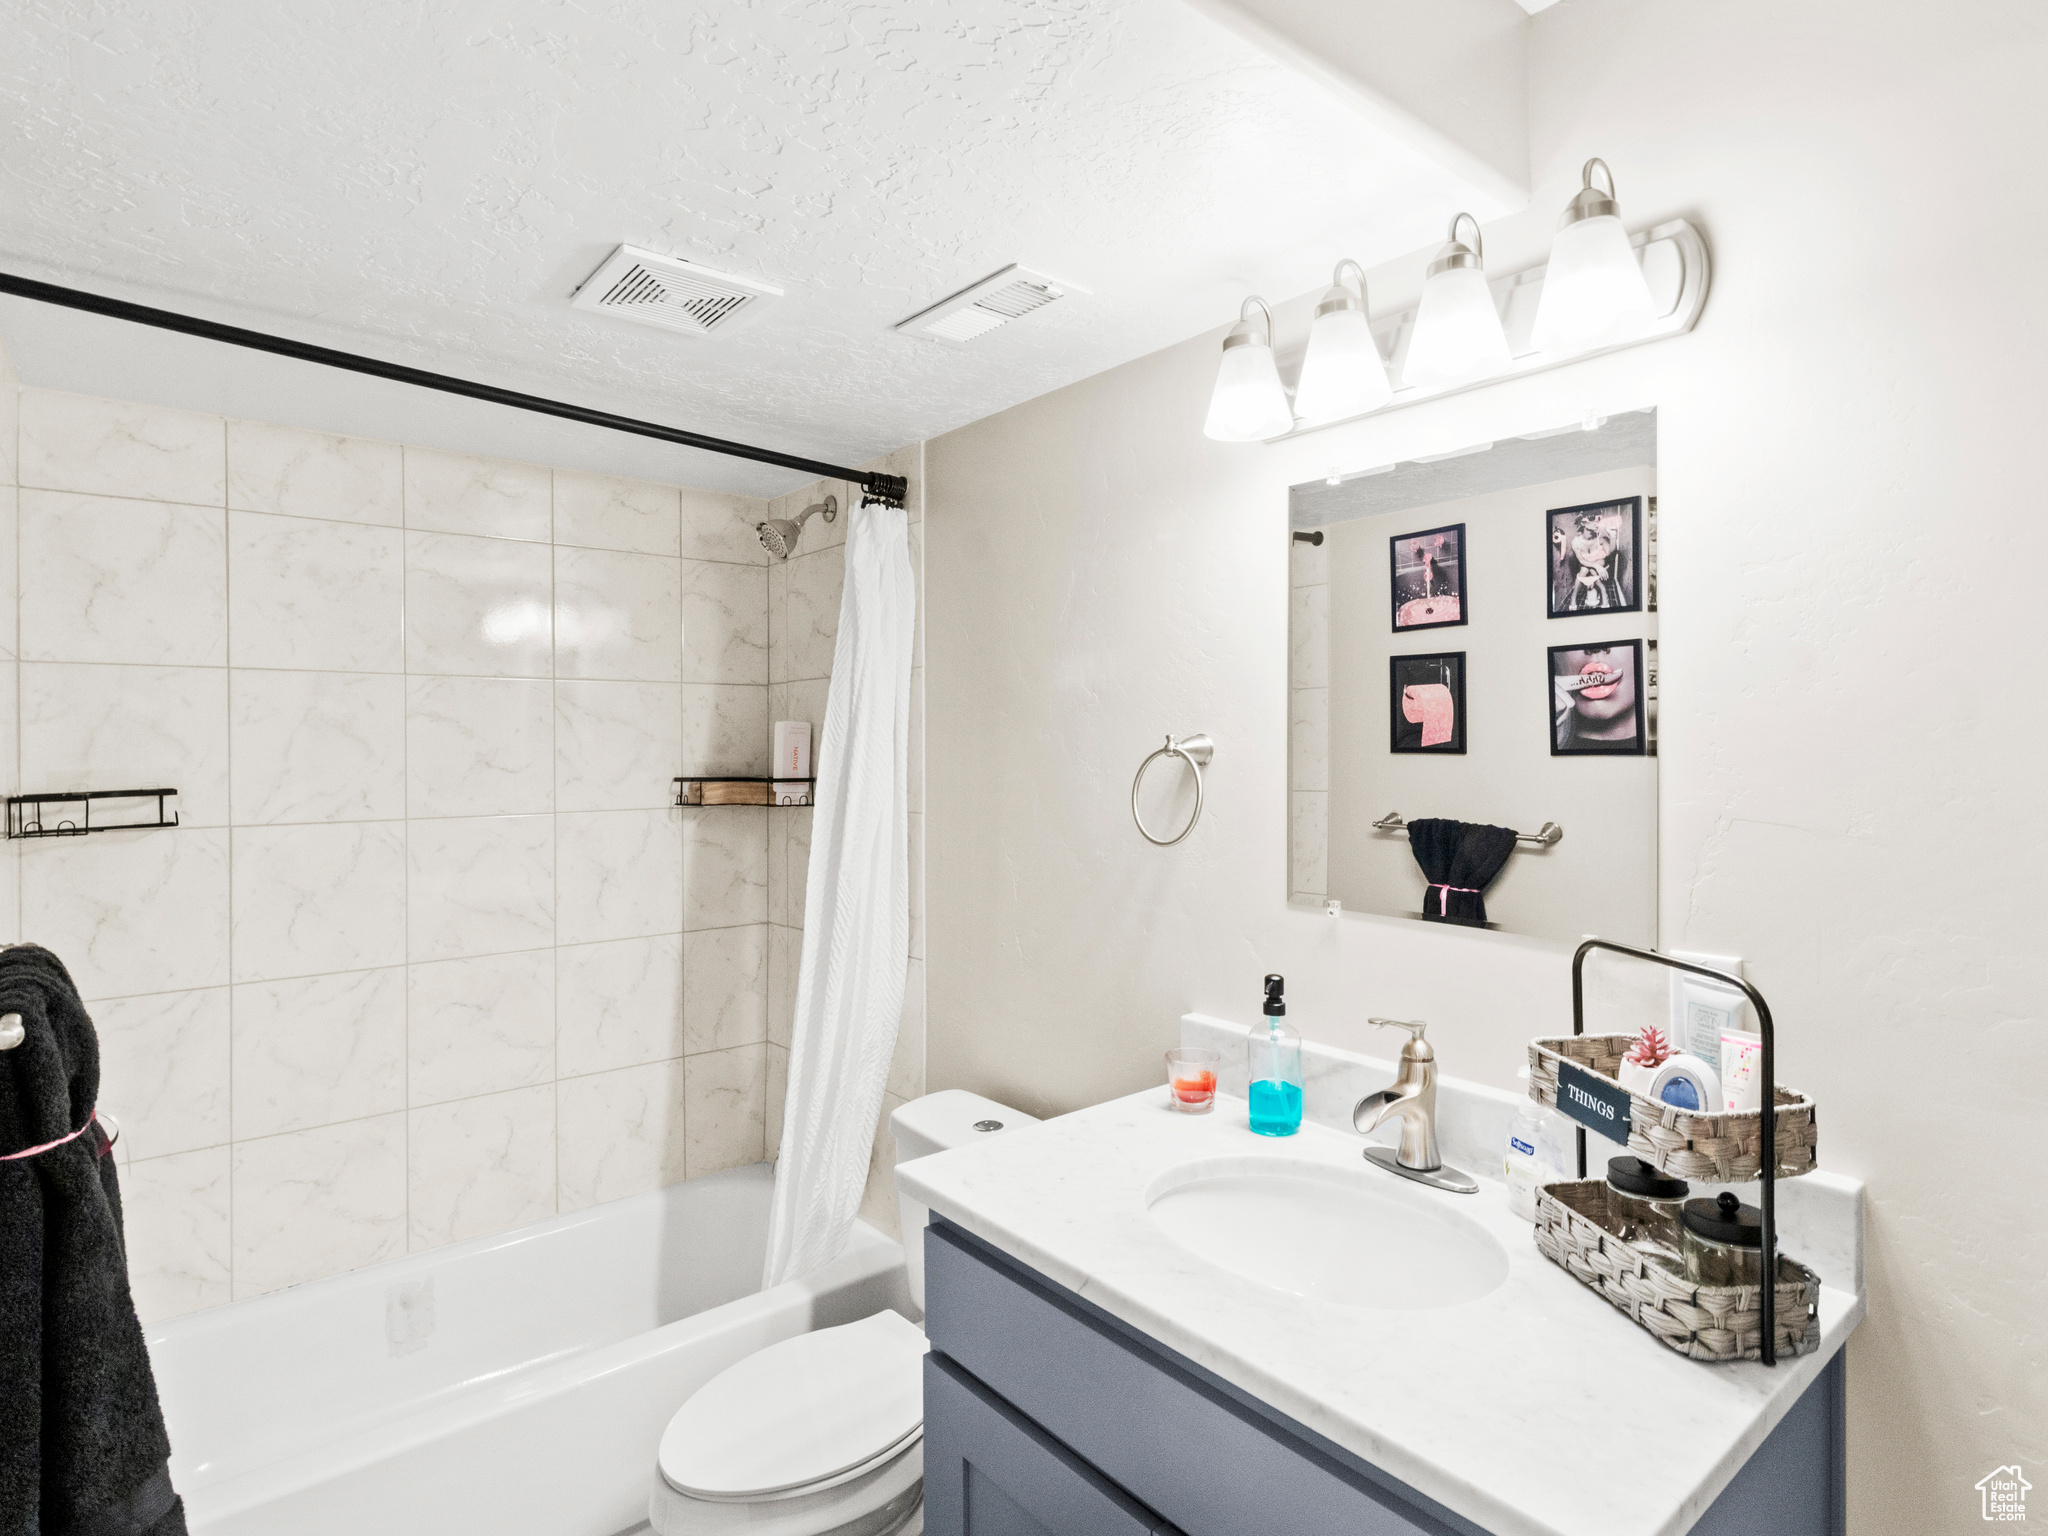 Full bathroom with shower / tub combo, toilet, a textured ceiling, and large vanity